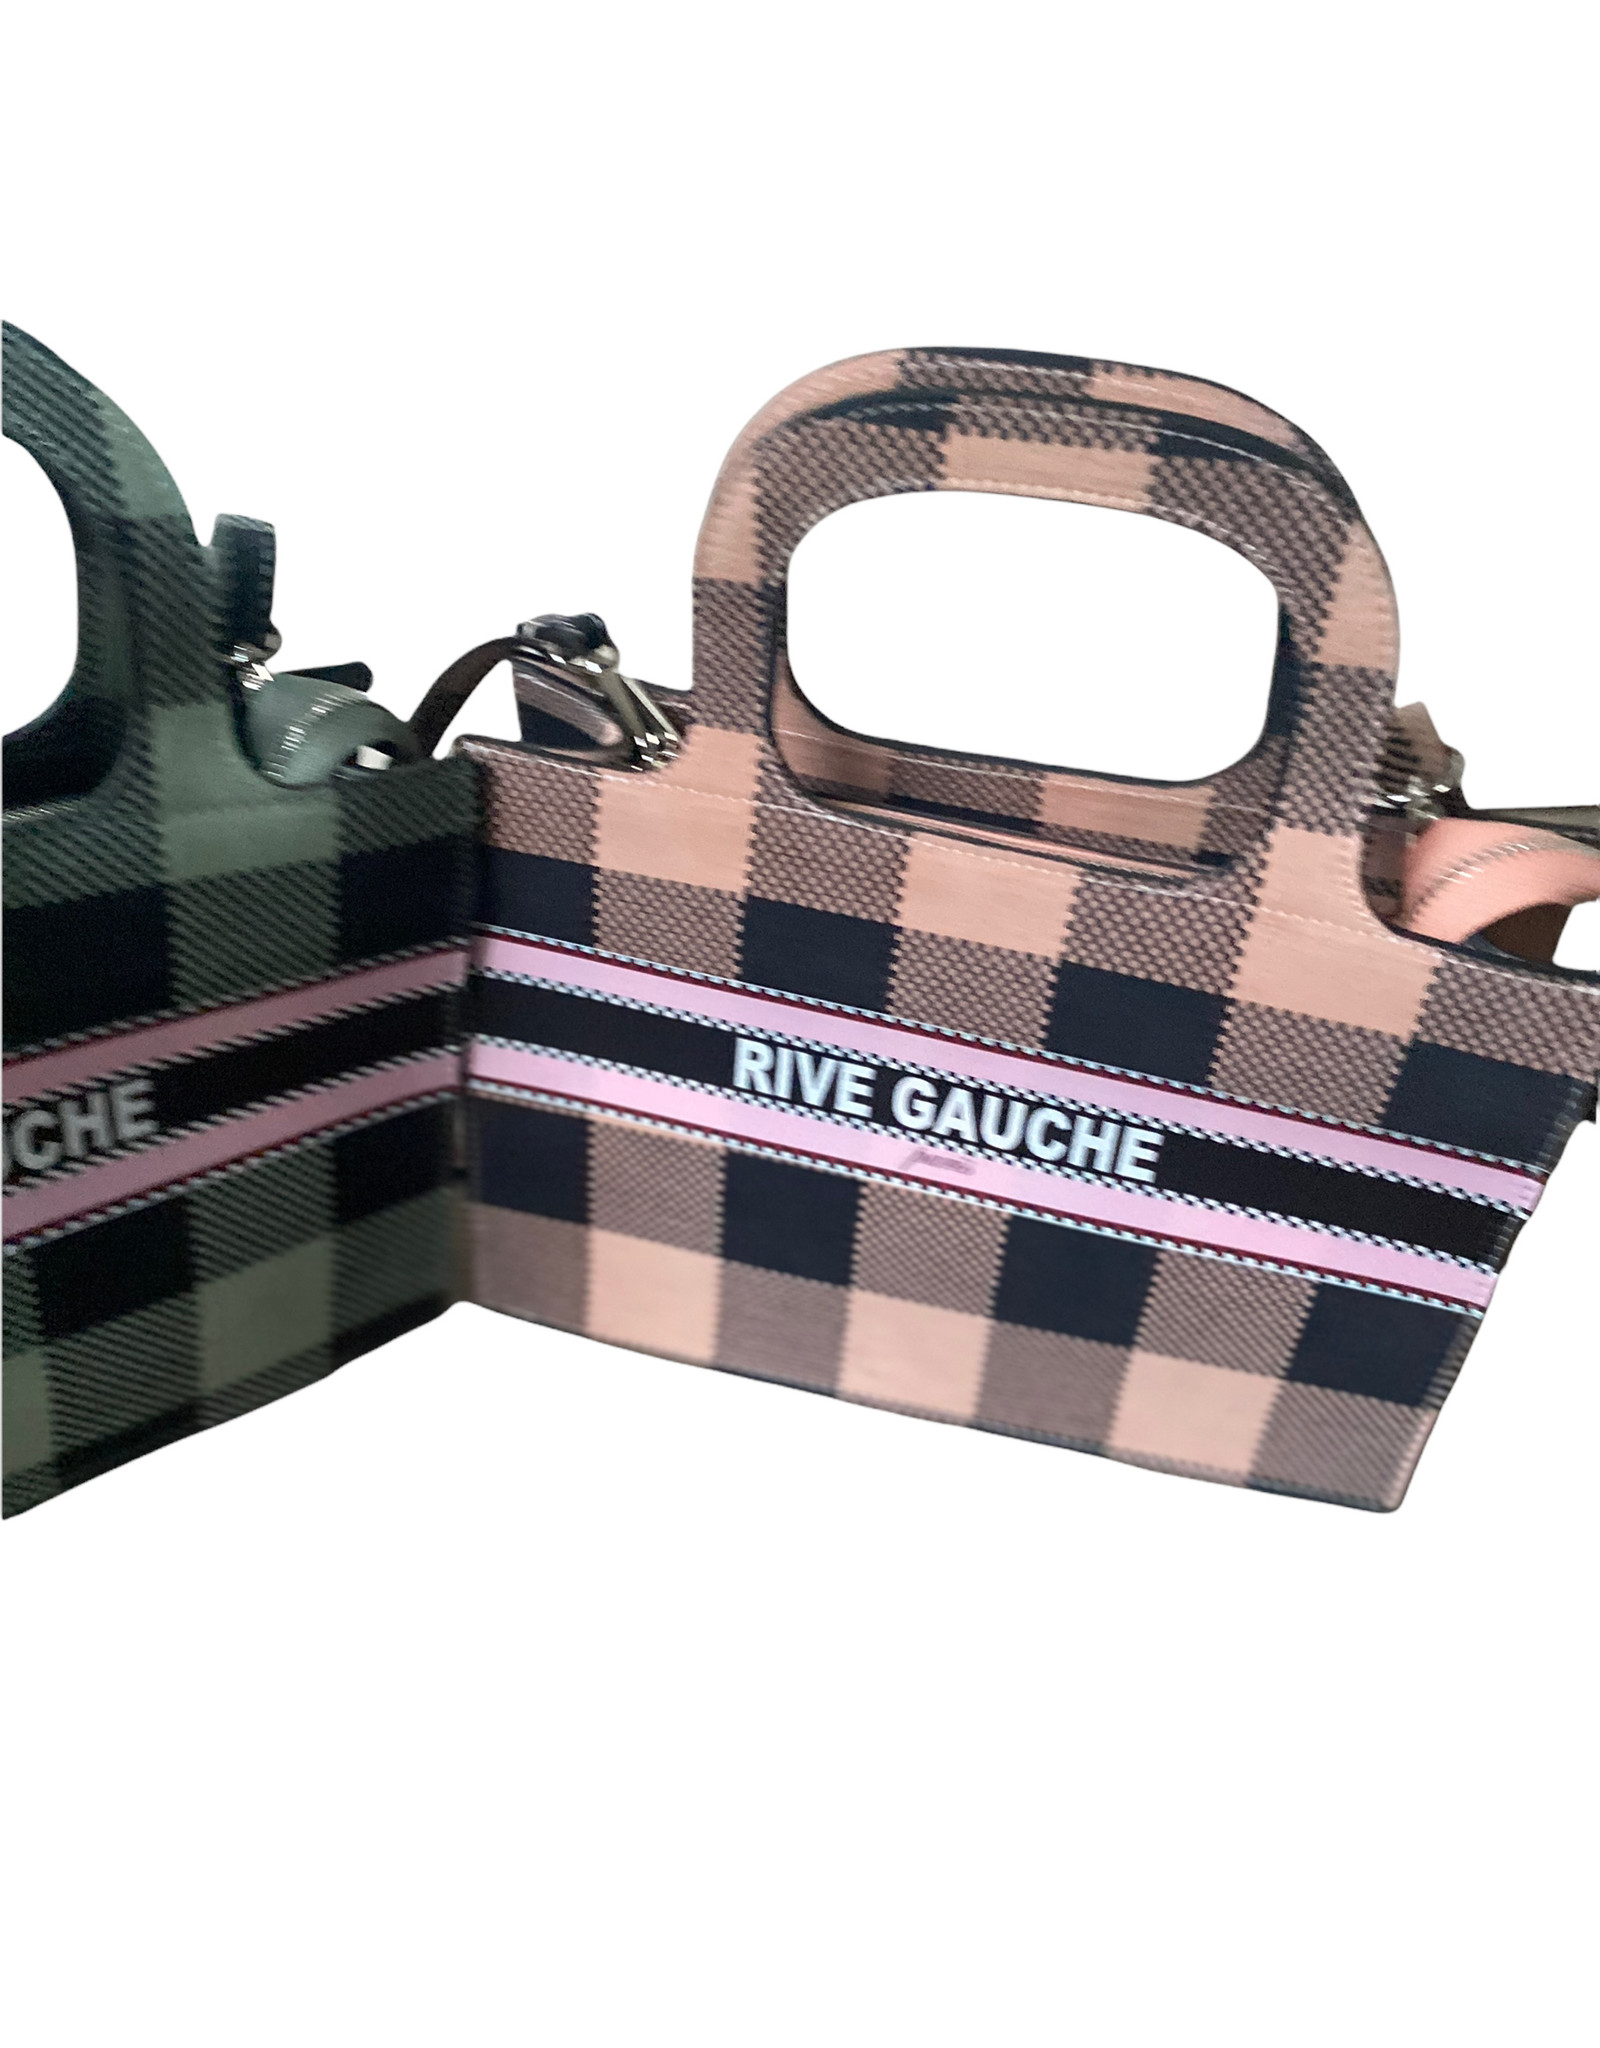 Buckskin bag checkered in several colors